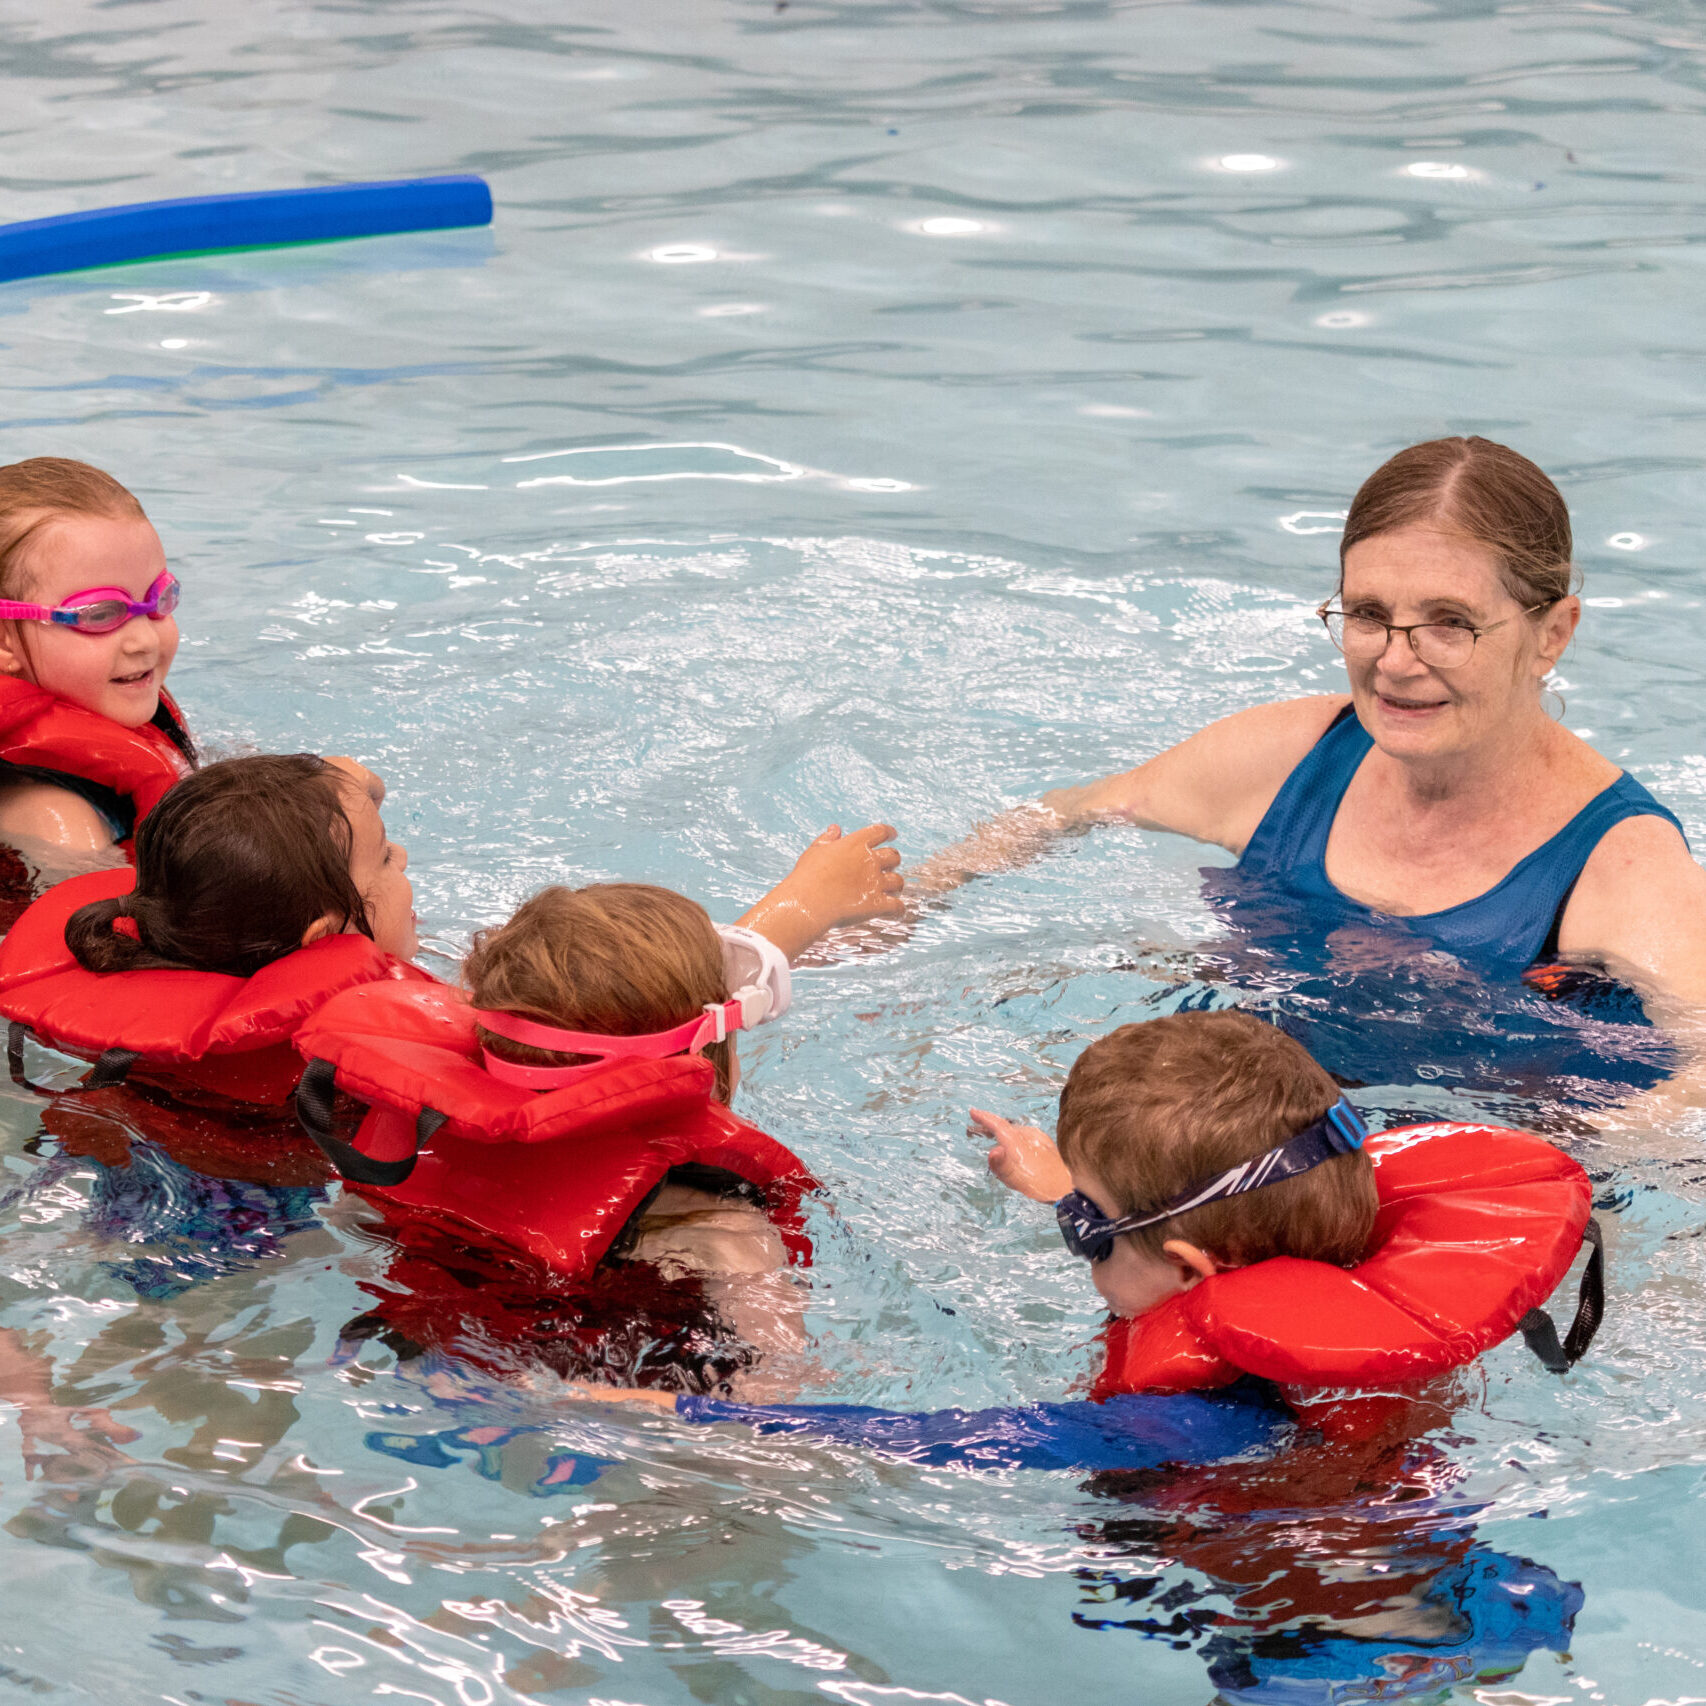 A lifeguard leads a group of young children wearing lifejackets in a swimming lesson